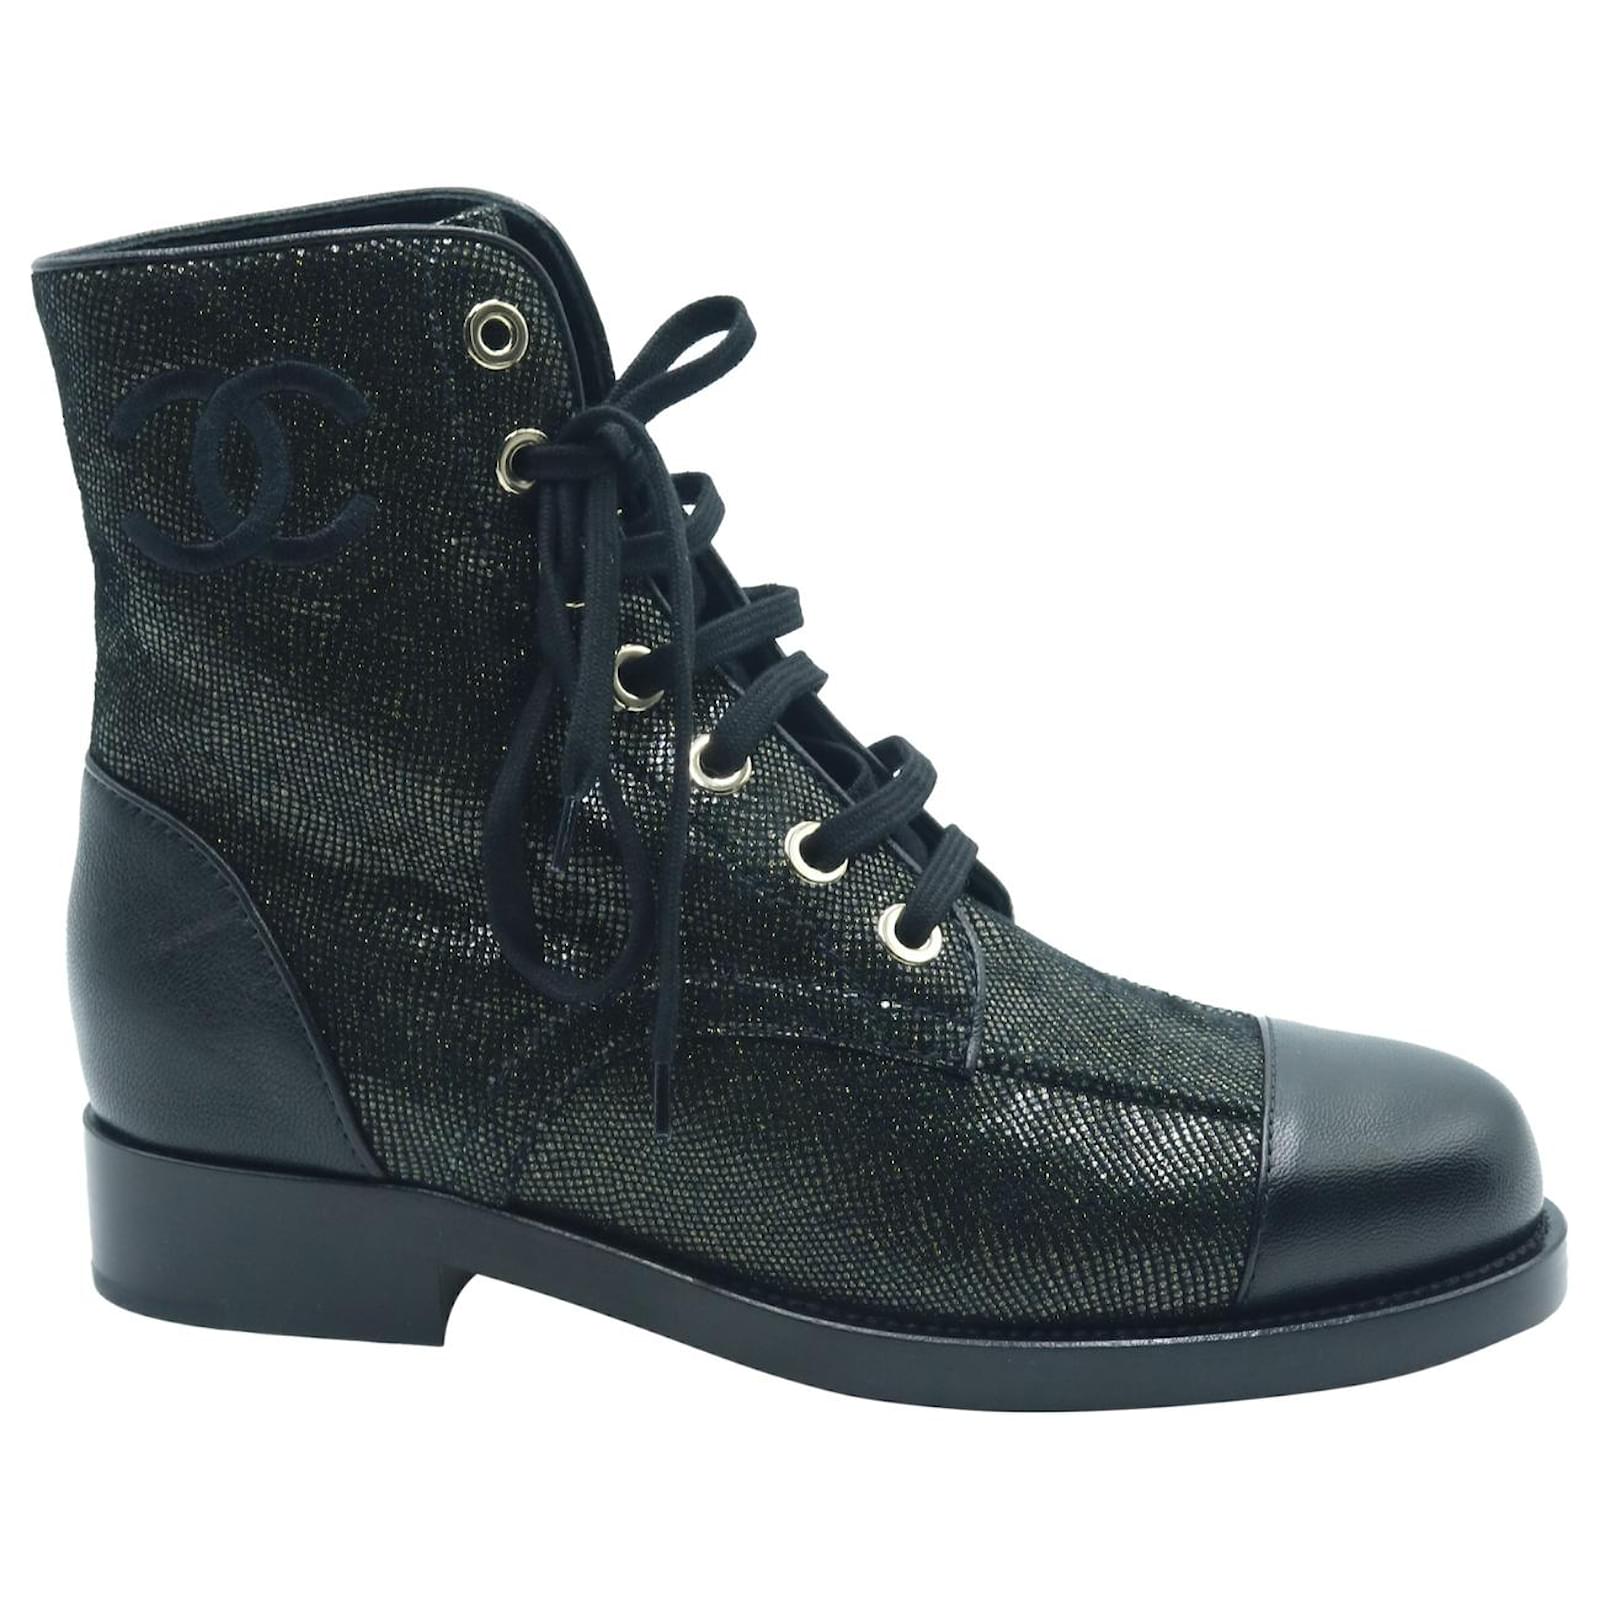 Chanel Leather Lace Up Boots  Leather and lace, Chanel combat